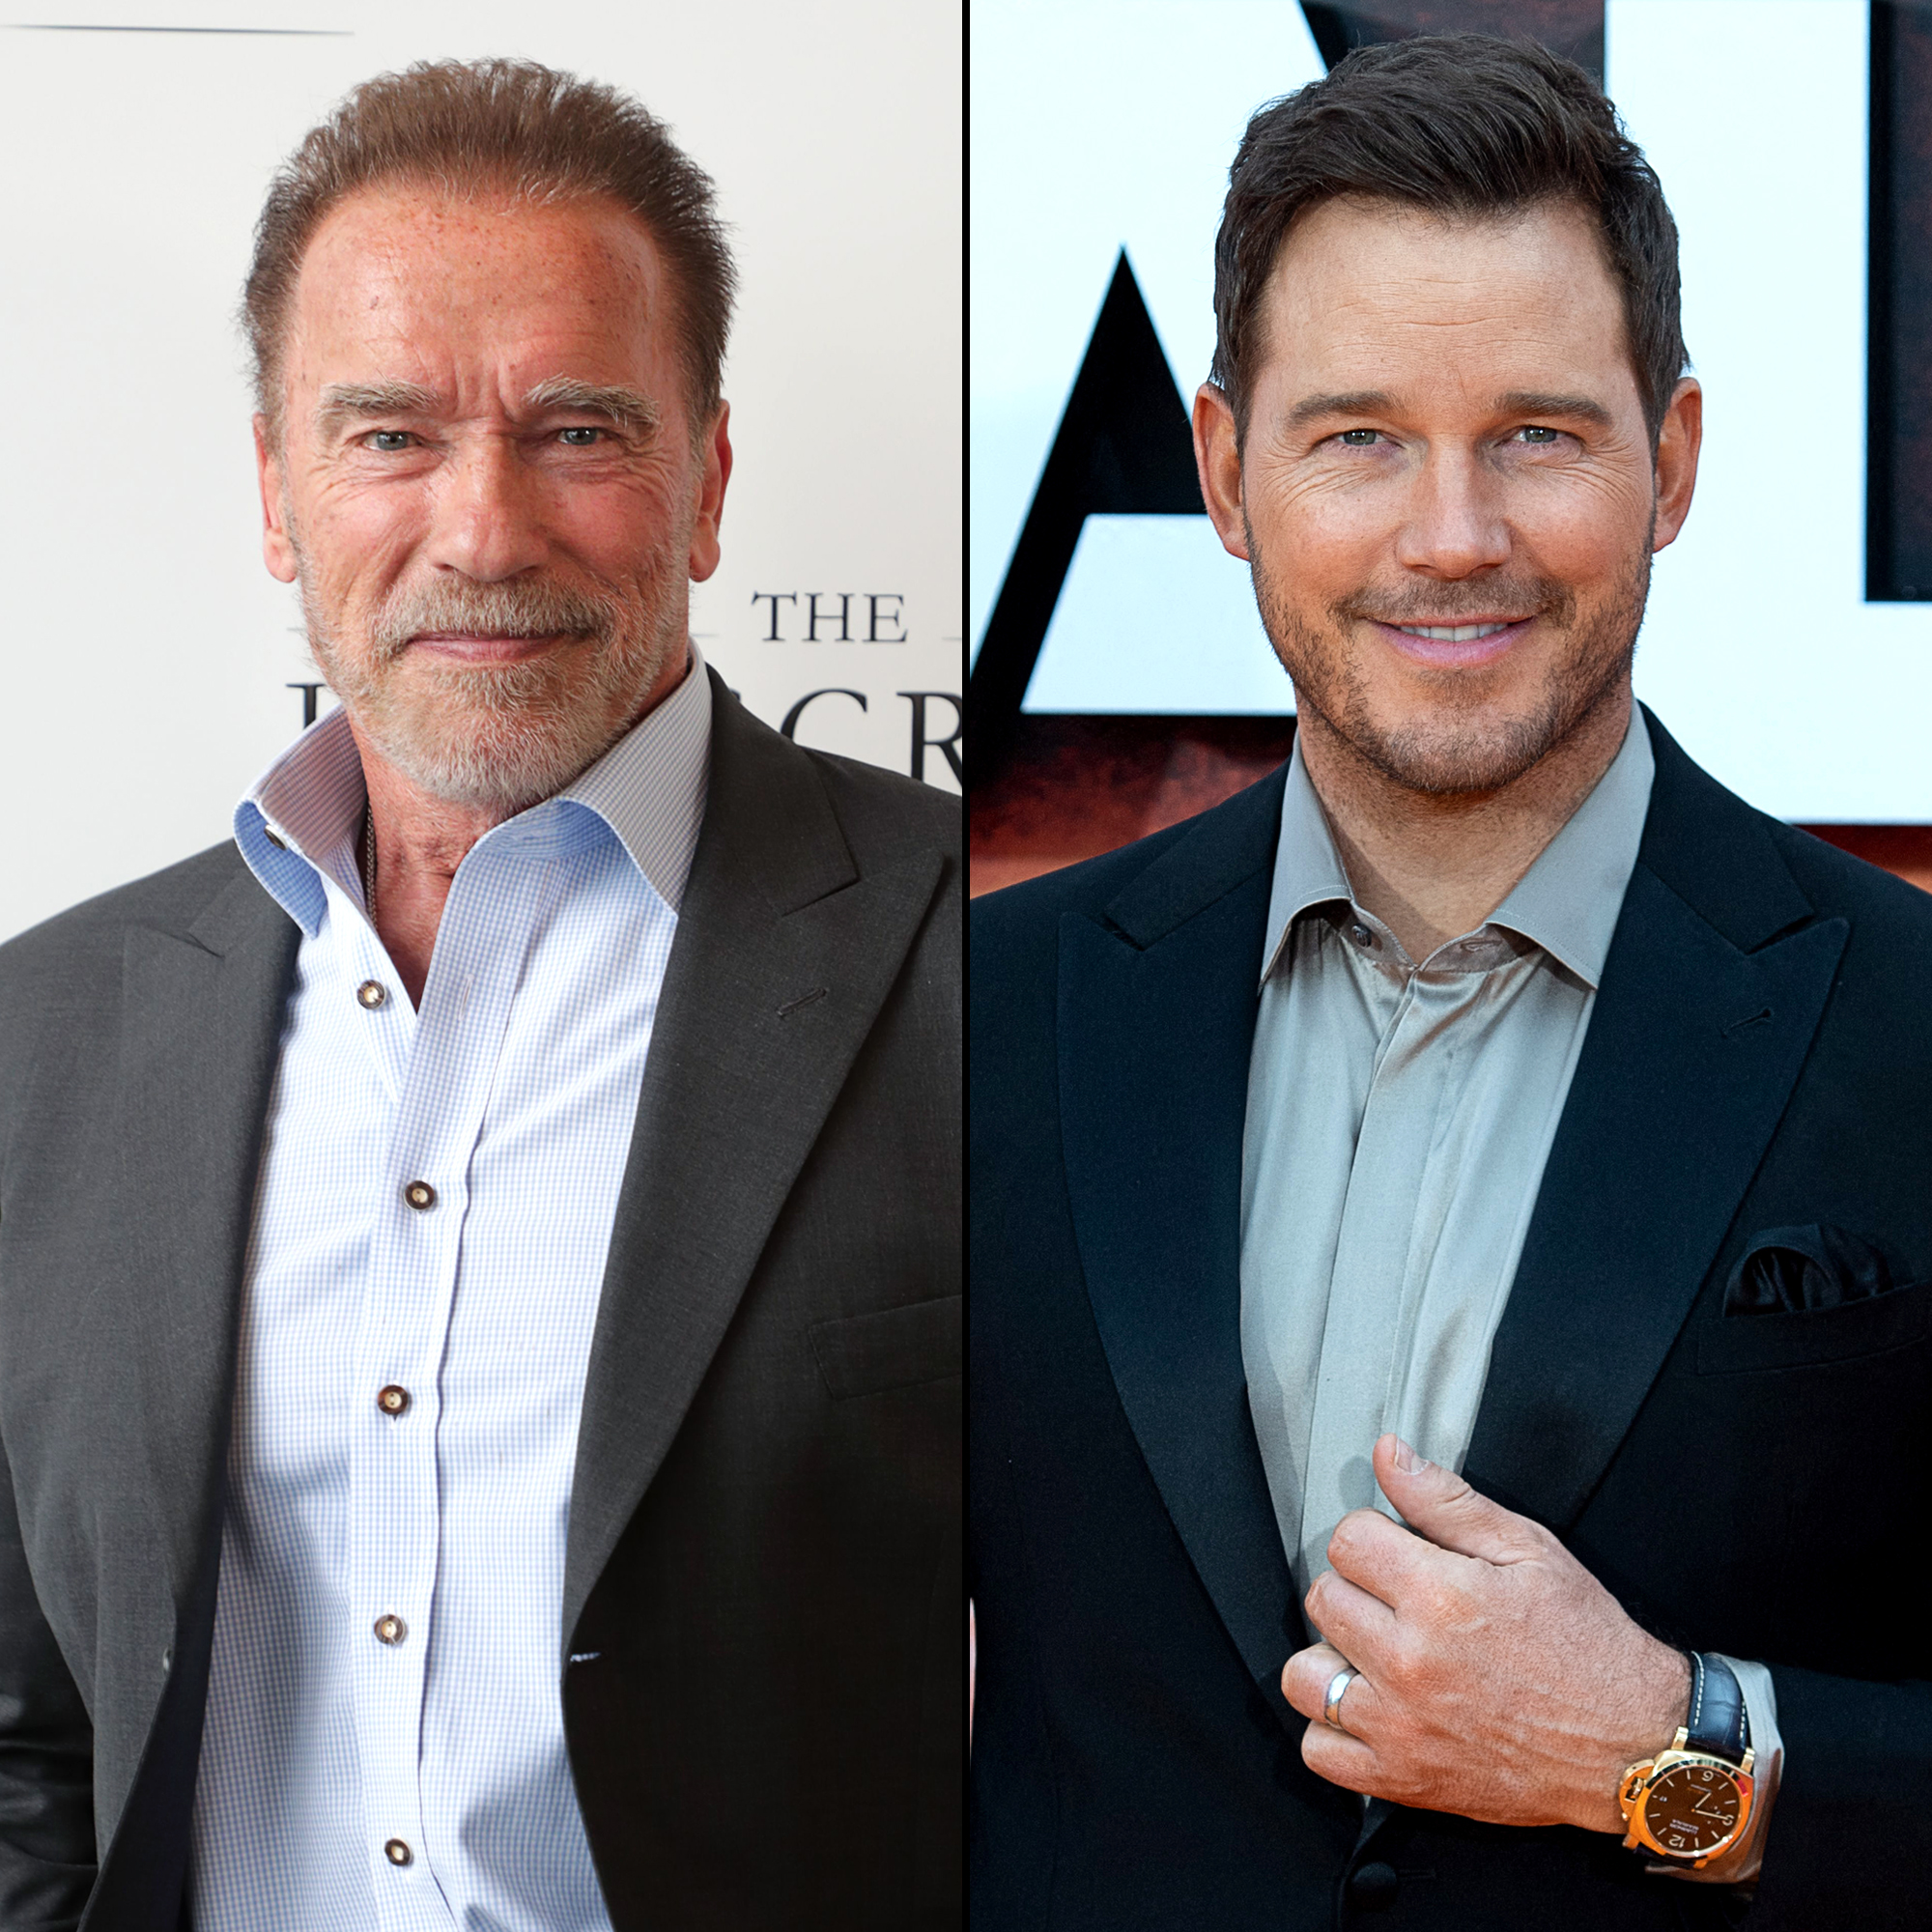 Guardians of the Galaxy's' Chris Pratt says father-in-law Arnold